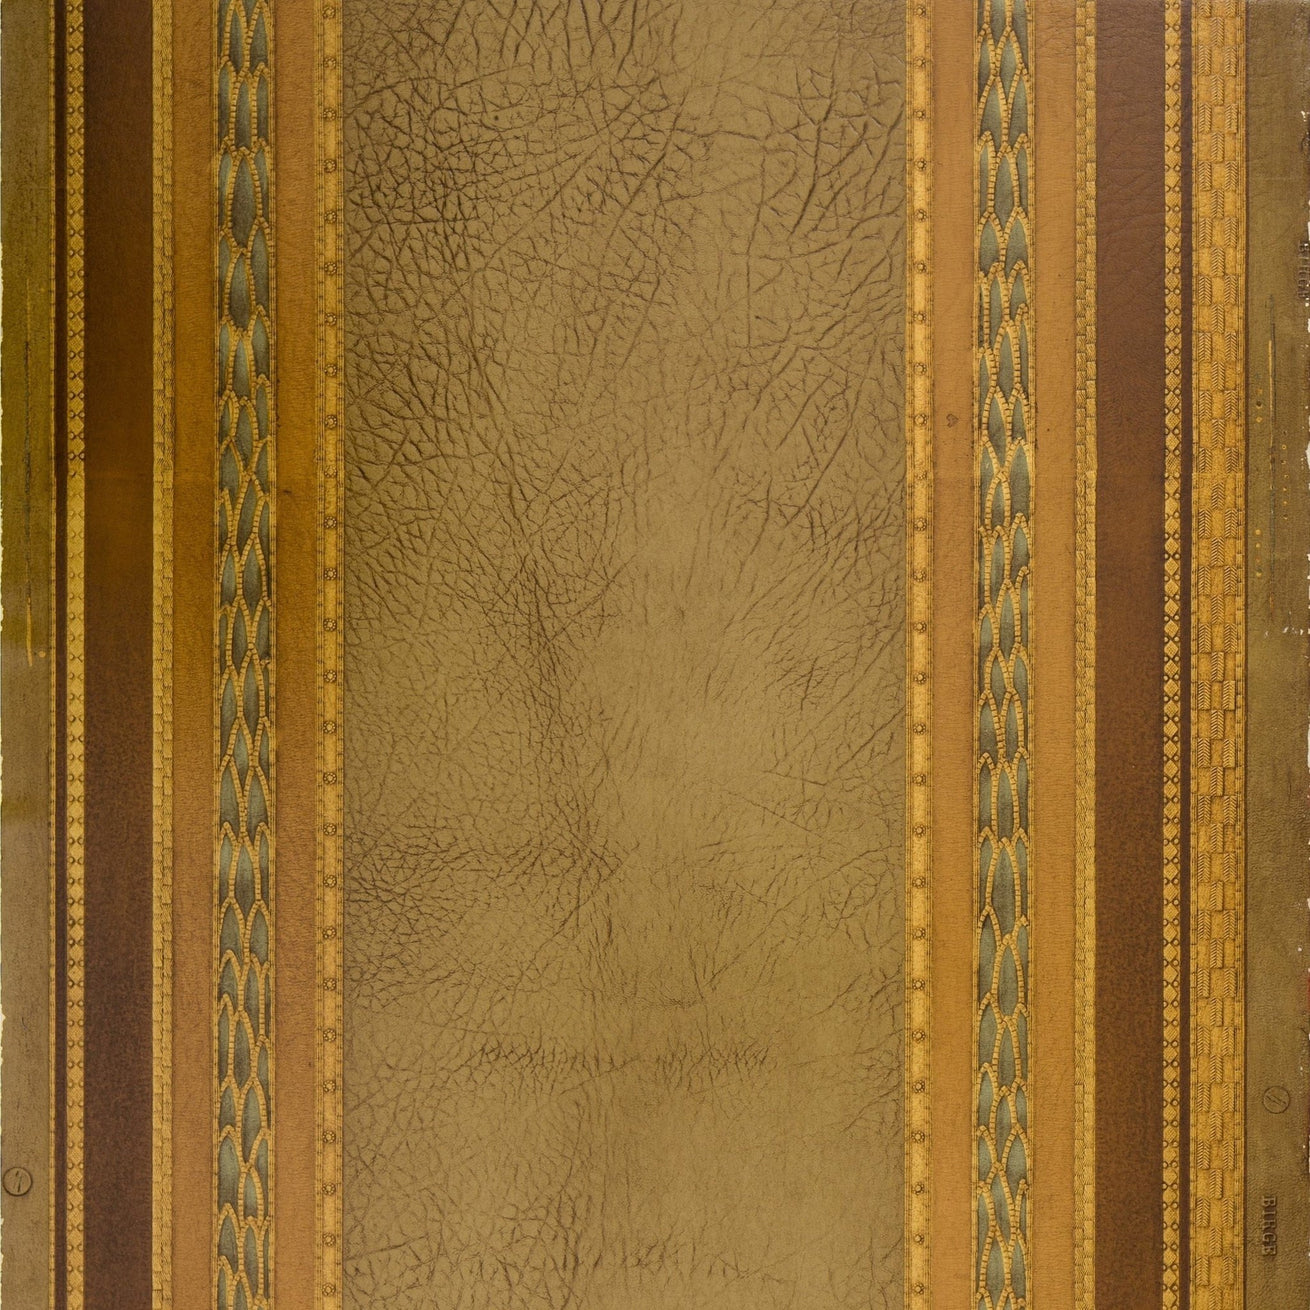 Leather with Bay Leaf Borders - Antique Wallpaper Remnant